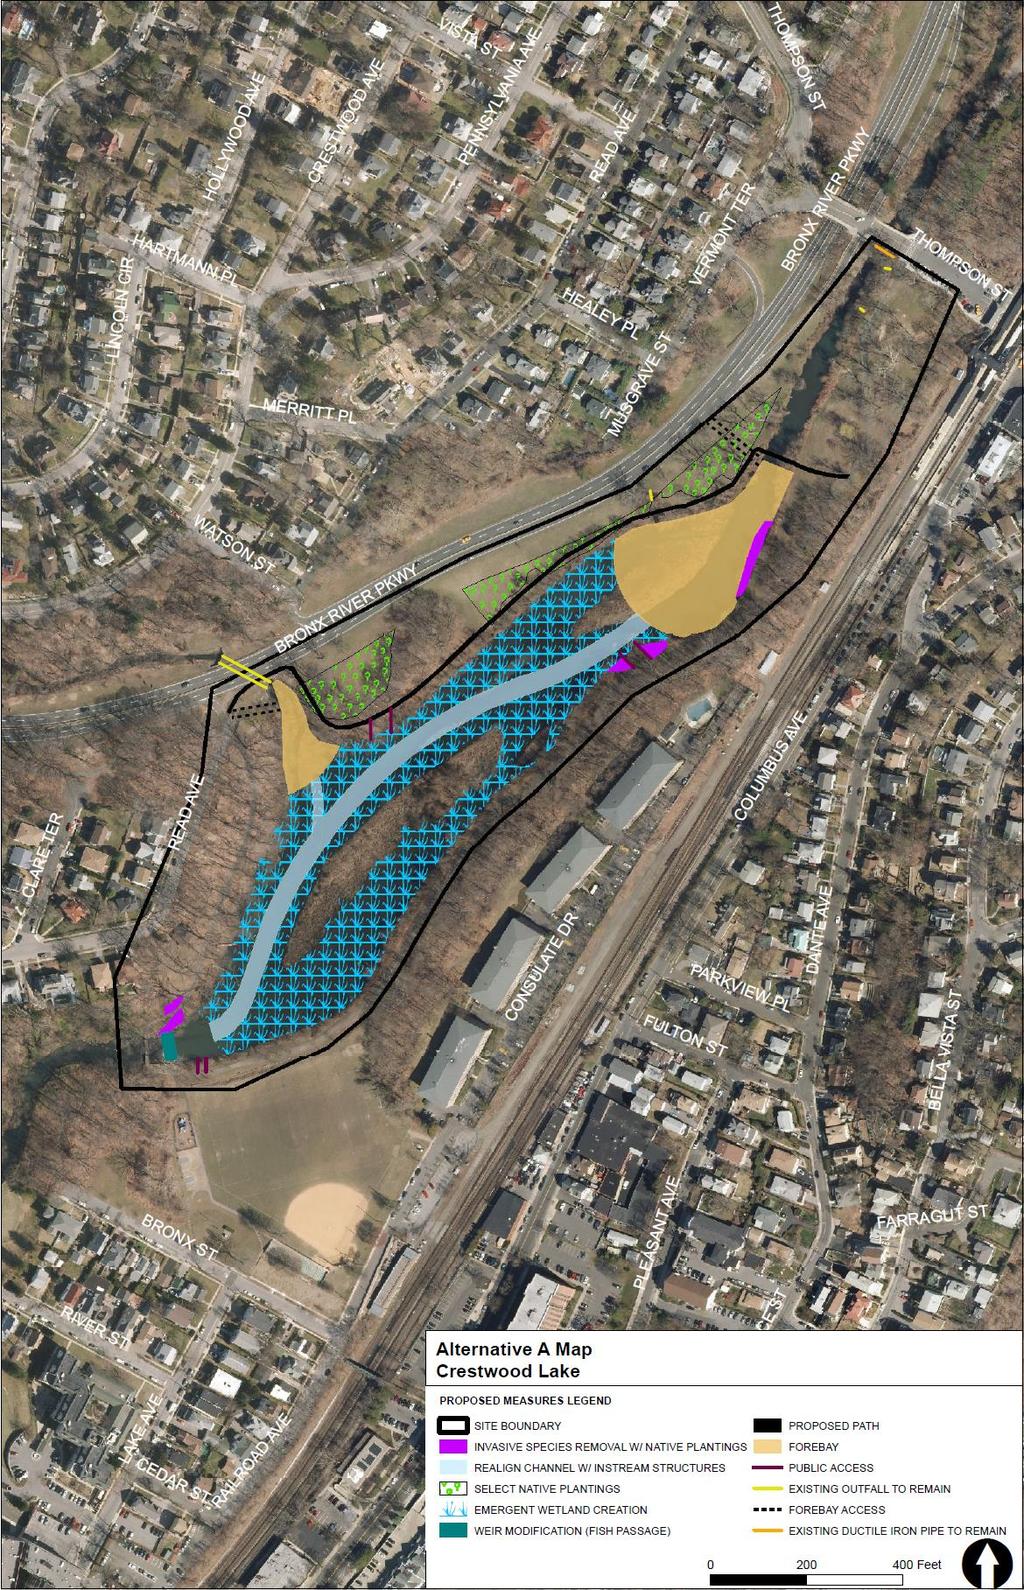 Muskrat Cove Tentatively Selected Plan Design: Invasive species removal with native plantings on the upland slopes and along both banks throughout the length of the site (~0.49 ac ).